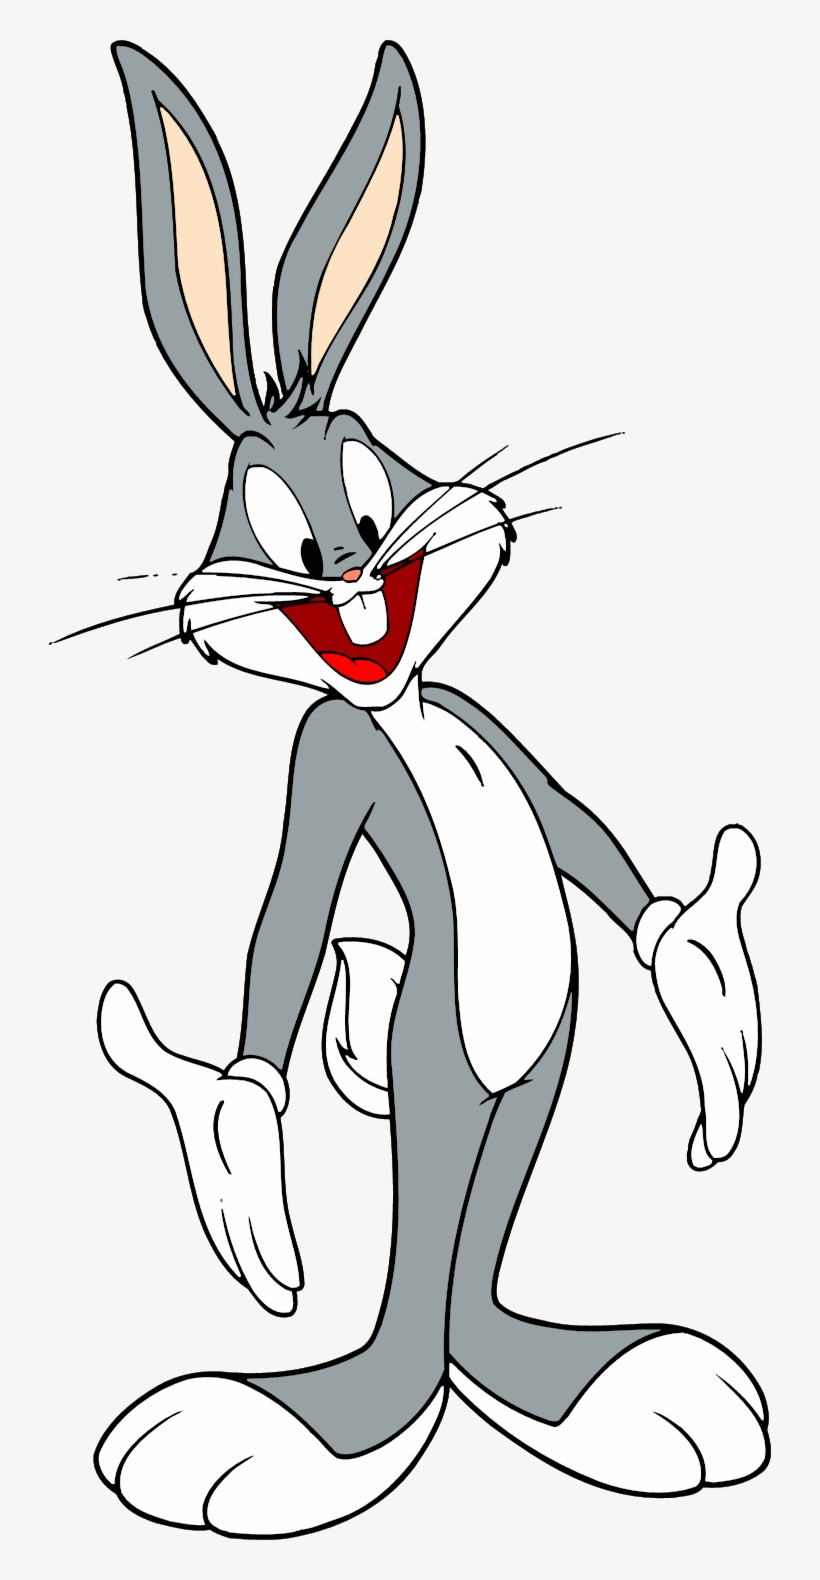 Bugs Bunny - Bugs Bunny Looney Tunes Characters, transparent png #270222